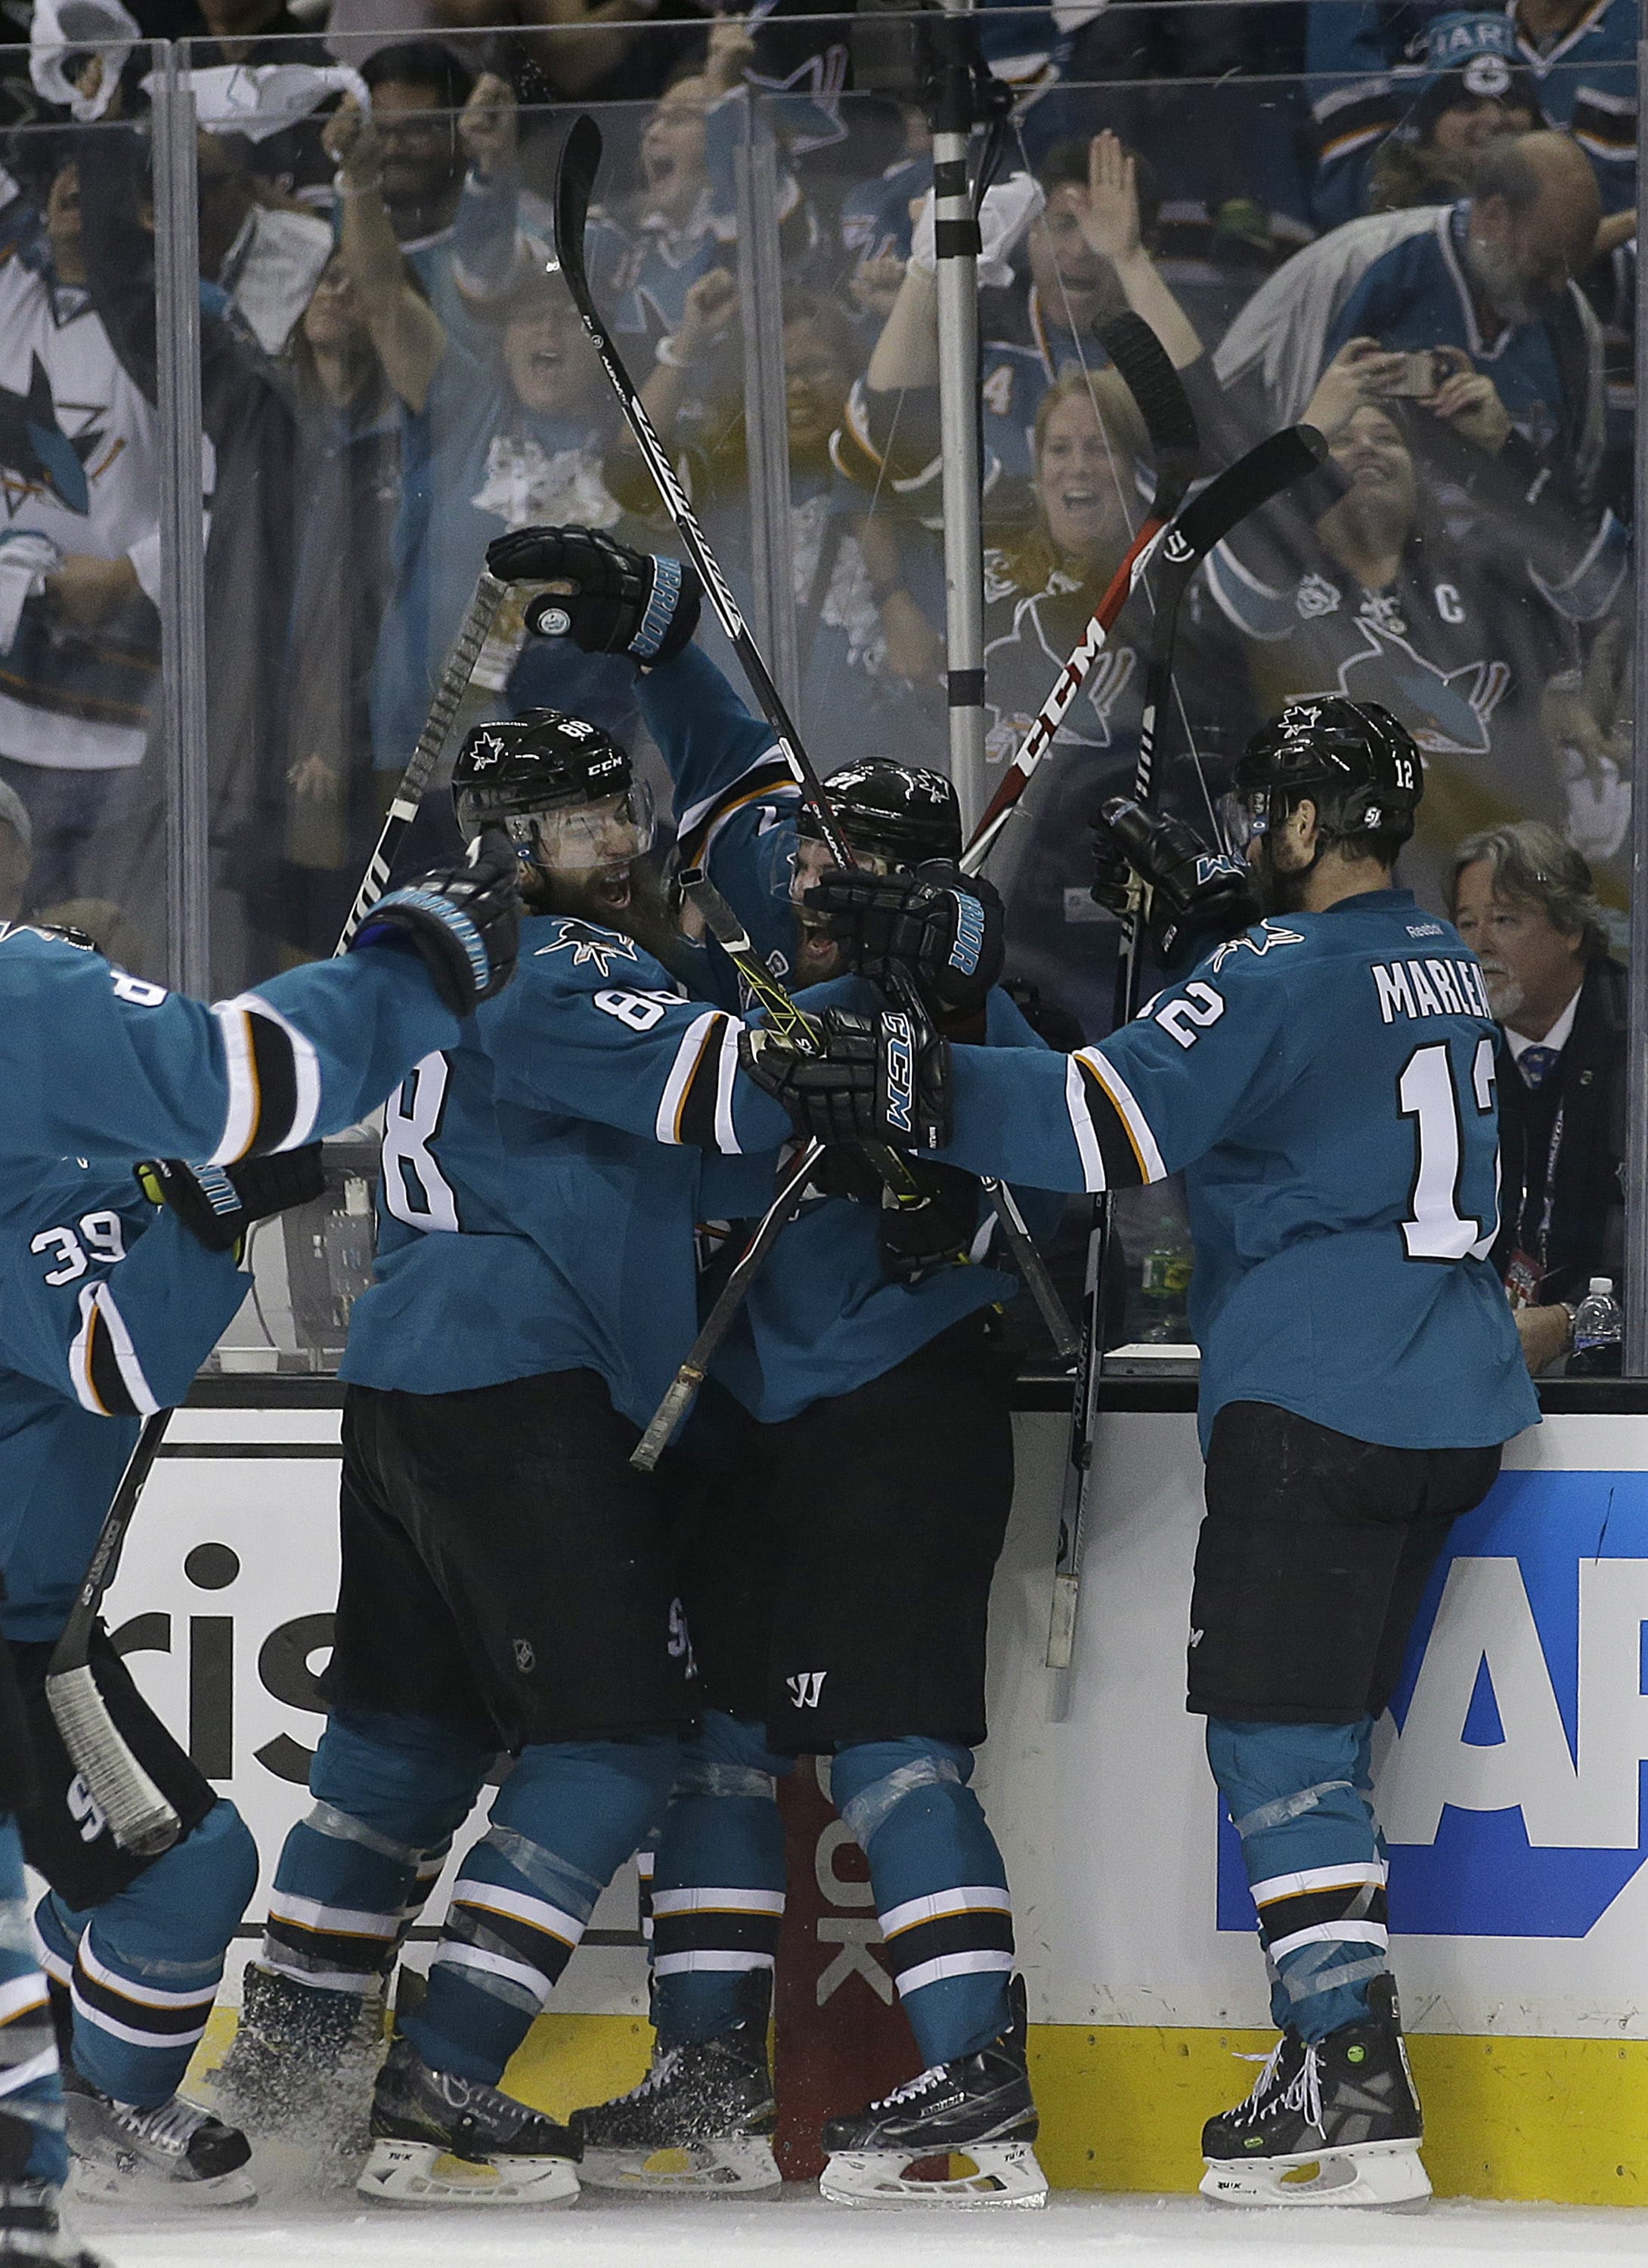 San Jose Sharks right winger Joonas Donskoi, center, celebrates with teammates after scoring the winning goal during overtime of Game 3 of the Stanley Cup Final against the Pittsburgh Penguins in San Jose, Calif., Saturday, June 4, 2016. The Sharks won 3-2.